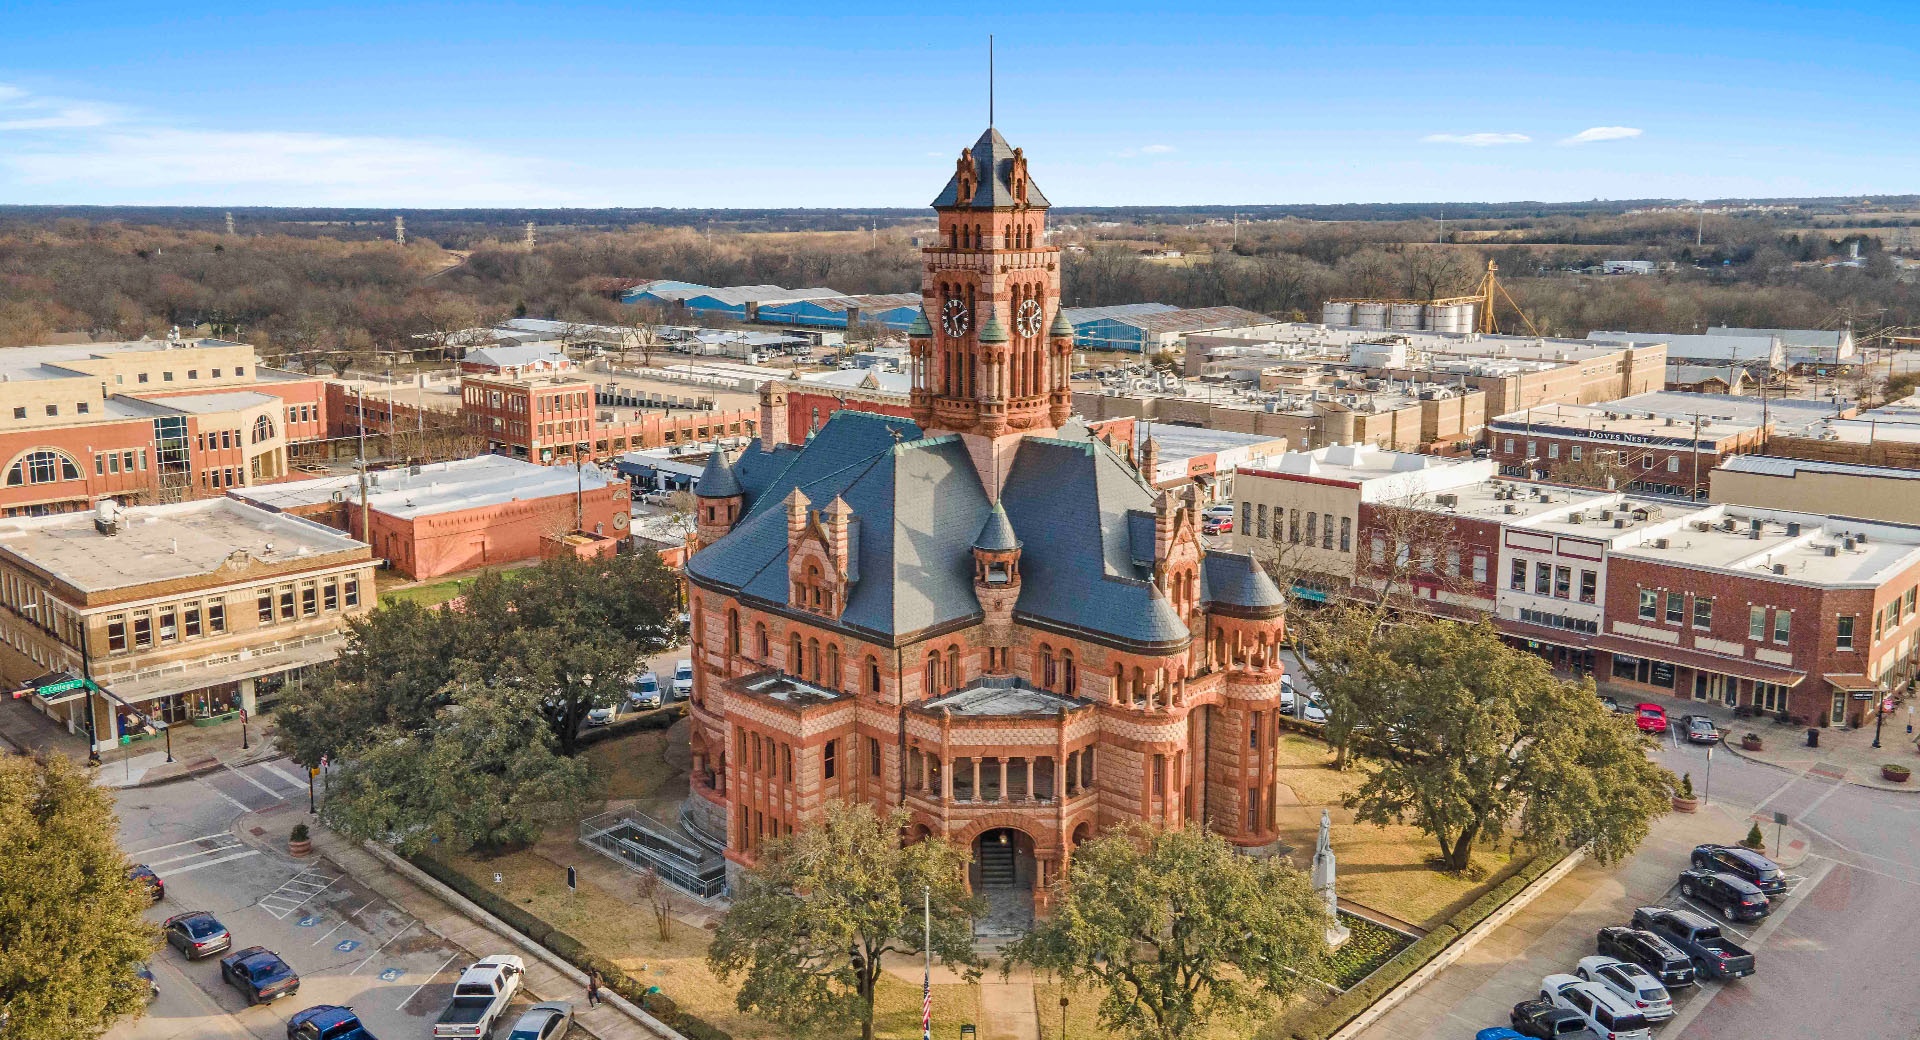 Aerial view of a historic red brick courthouse with a clock tower, surrounded by downtown buildings including new homes in Mansfield TX, in a small city.